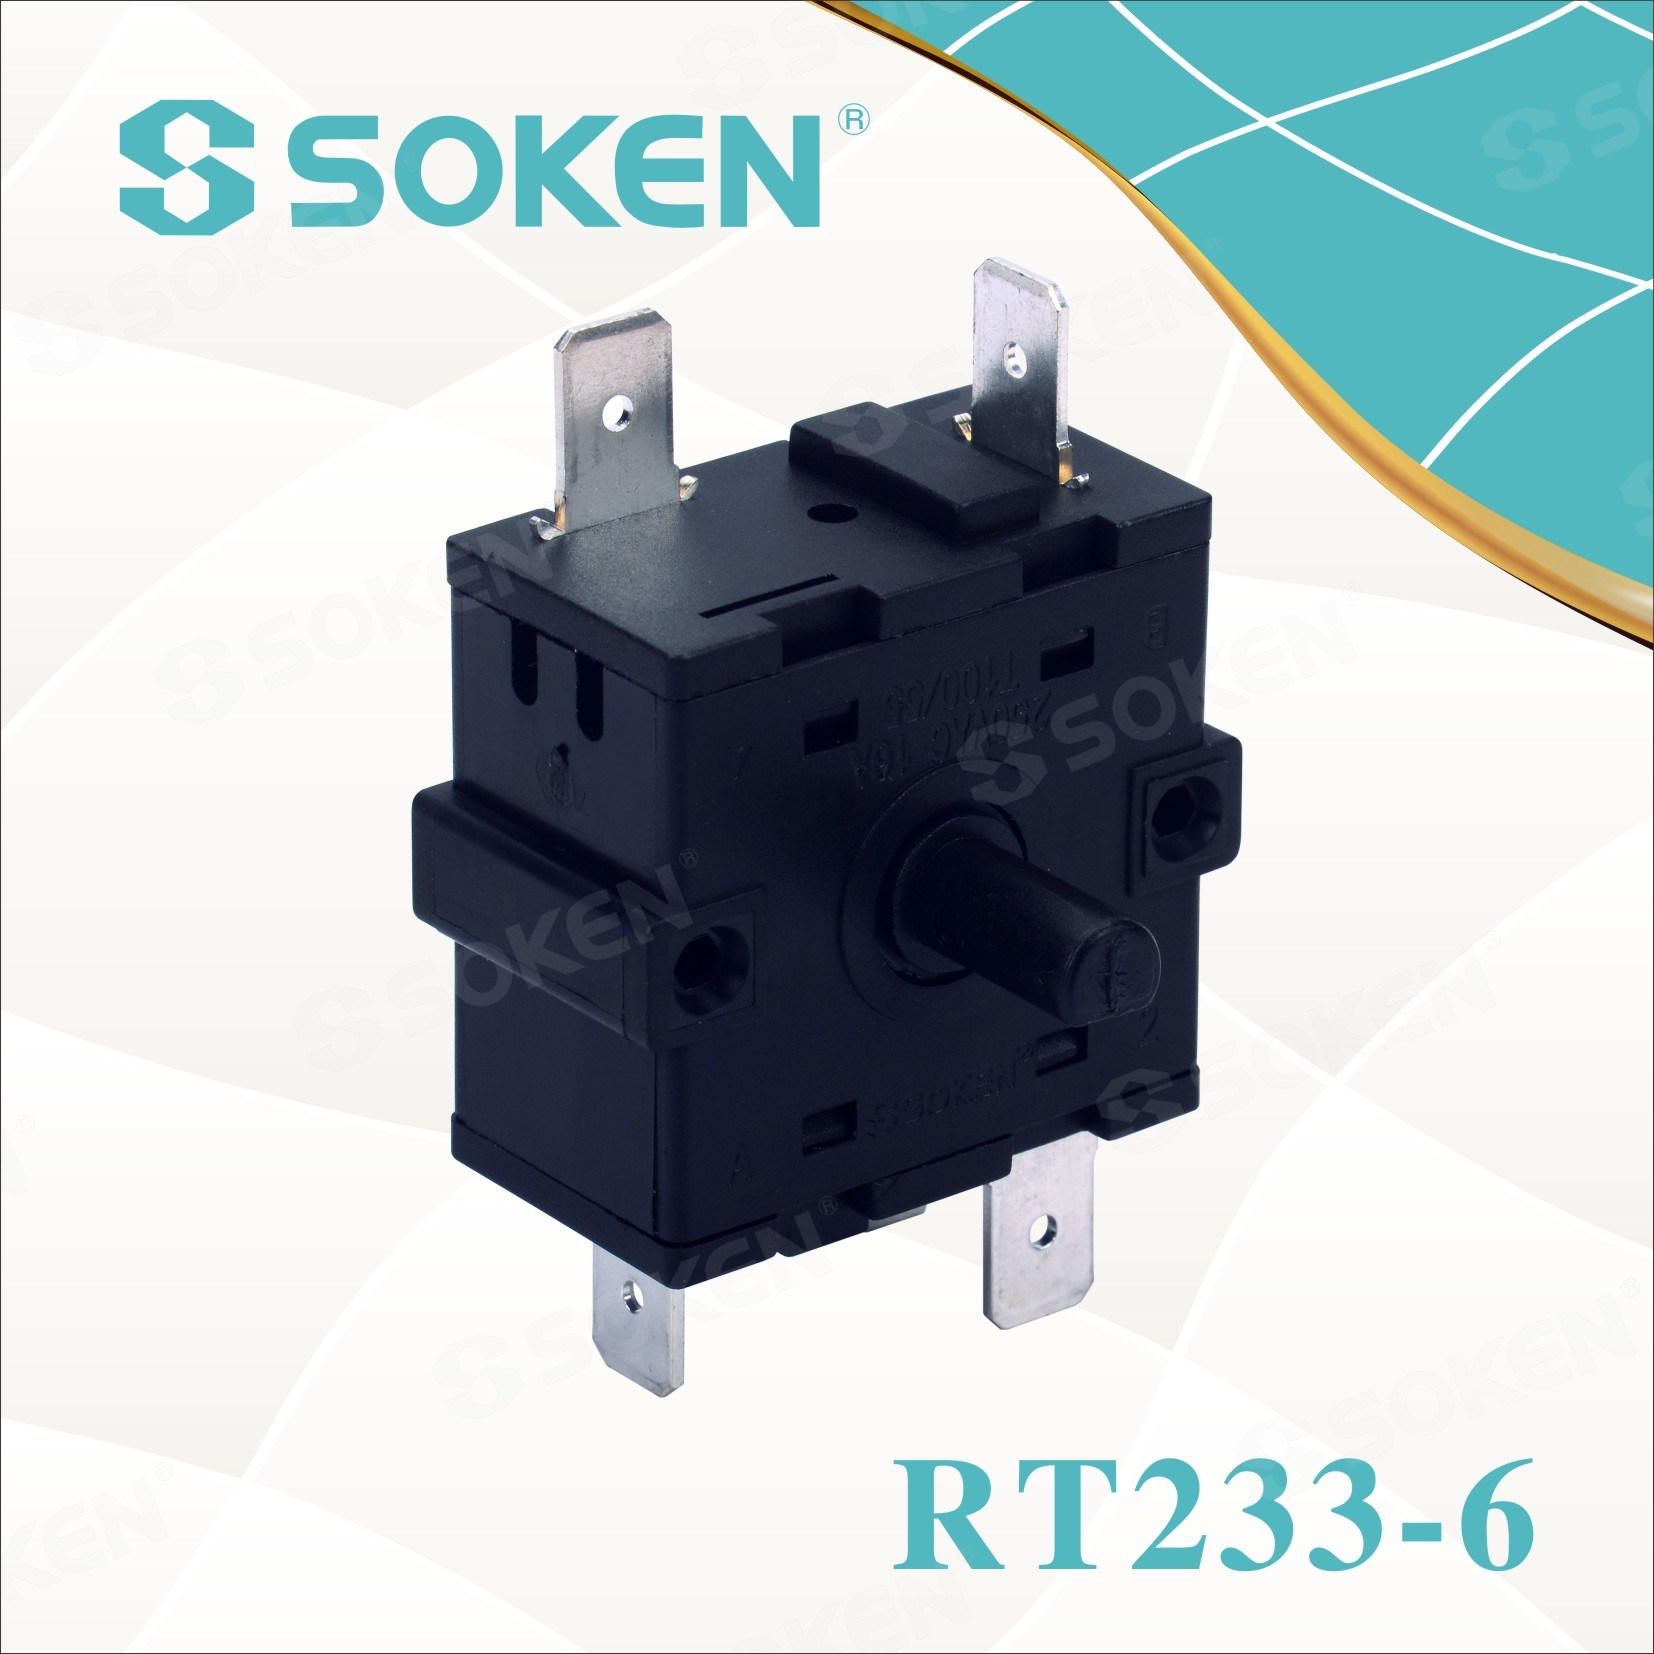 Soken Cleaner Rotary Switch